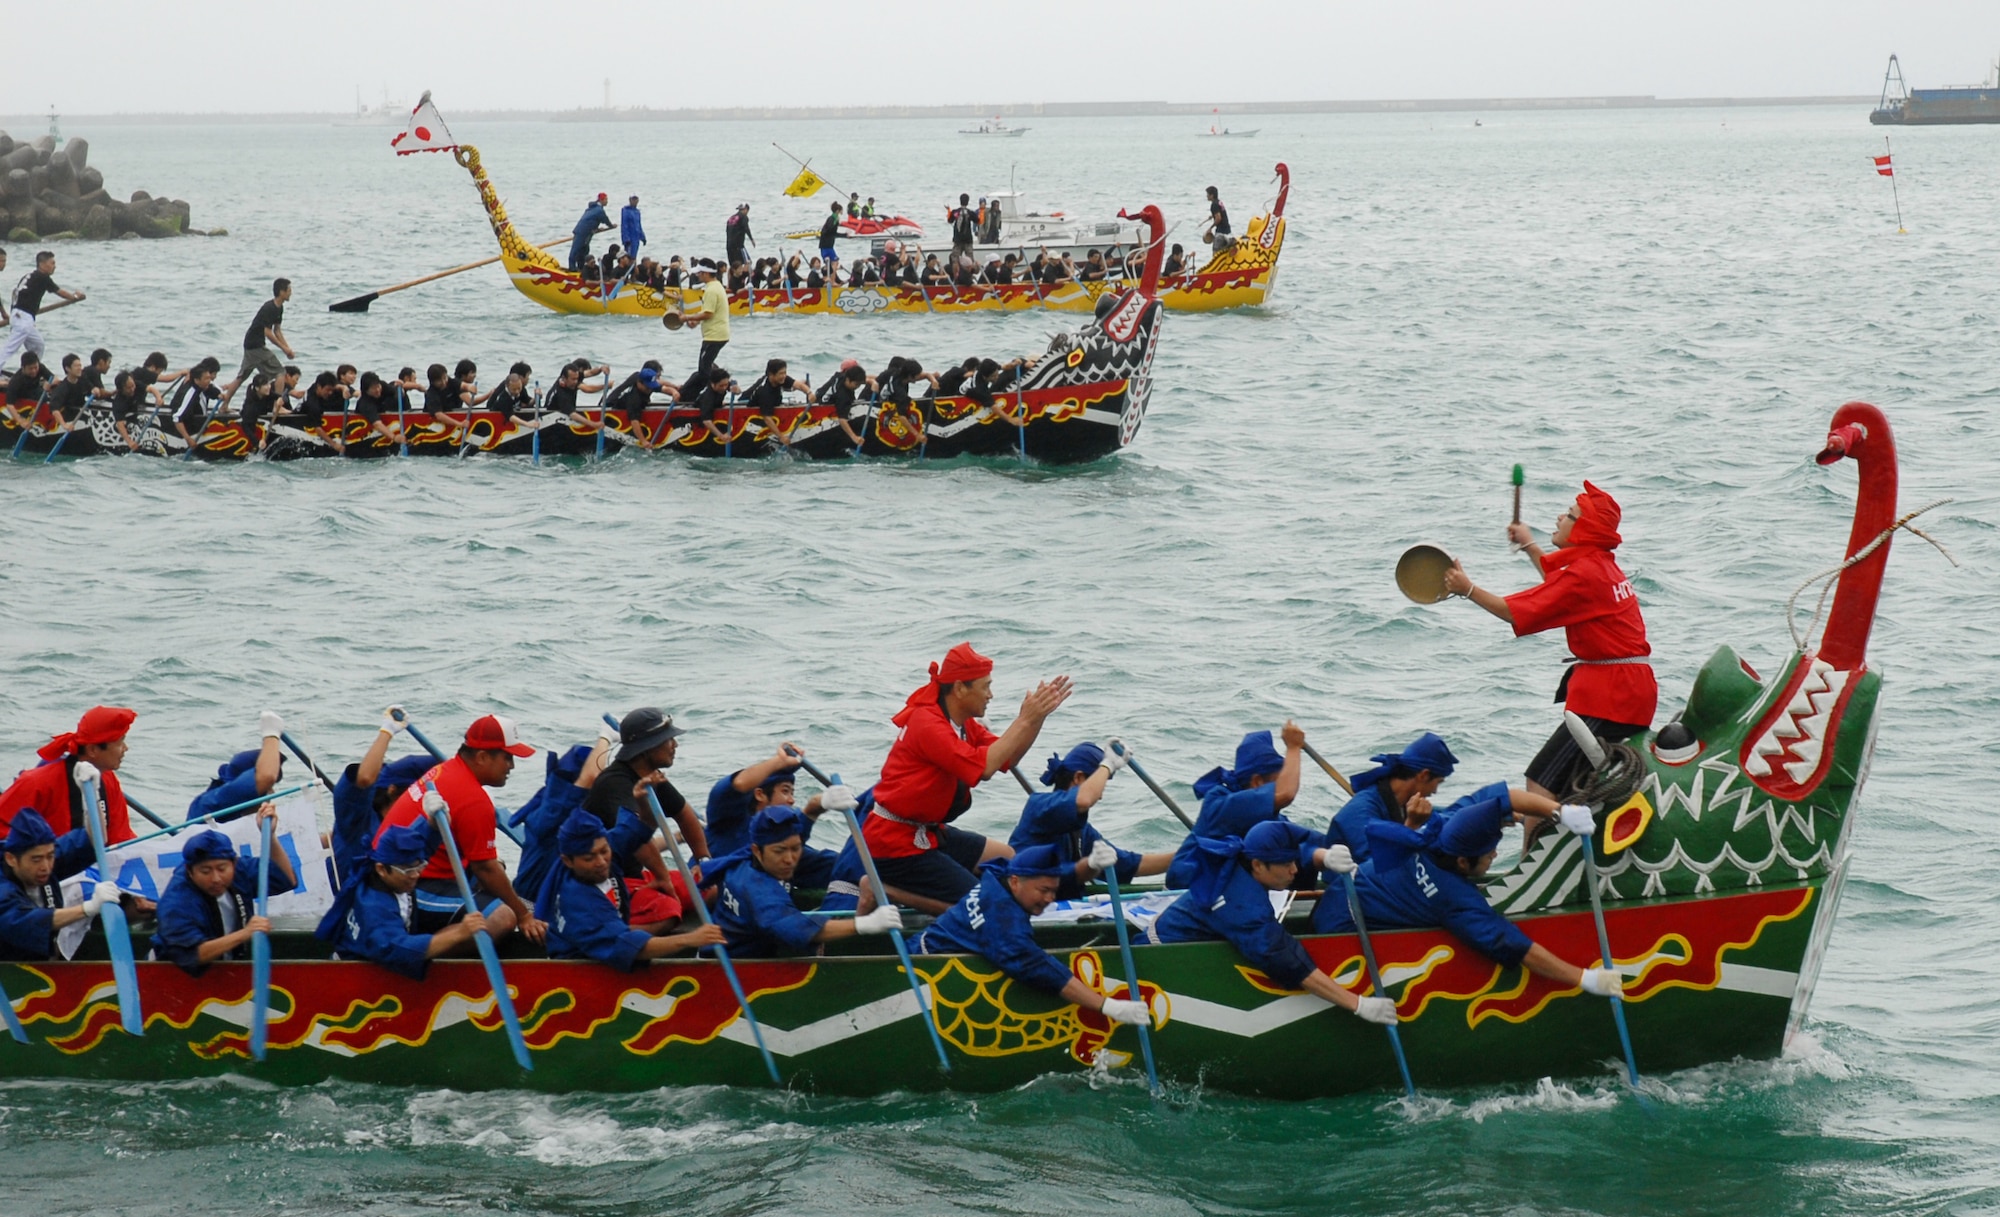 Three teams battle for the lead during the Dragon Boat Race May 5, 2008 at Tomari Port. The race, which caps off the week-long series of Japanese holidays called Golden Week, has been held annually for centuries on Okinawa.
(U.S. Air Force photo/Airman Chad Warren)